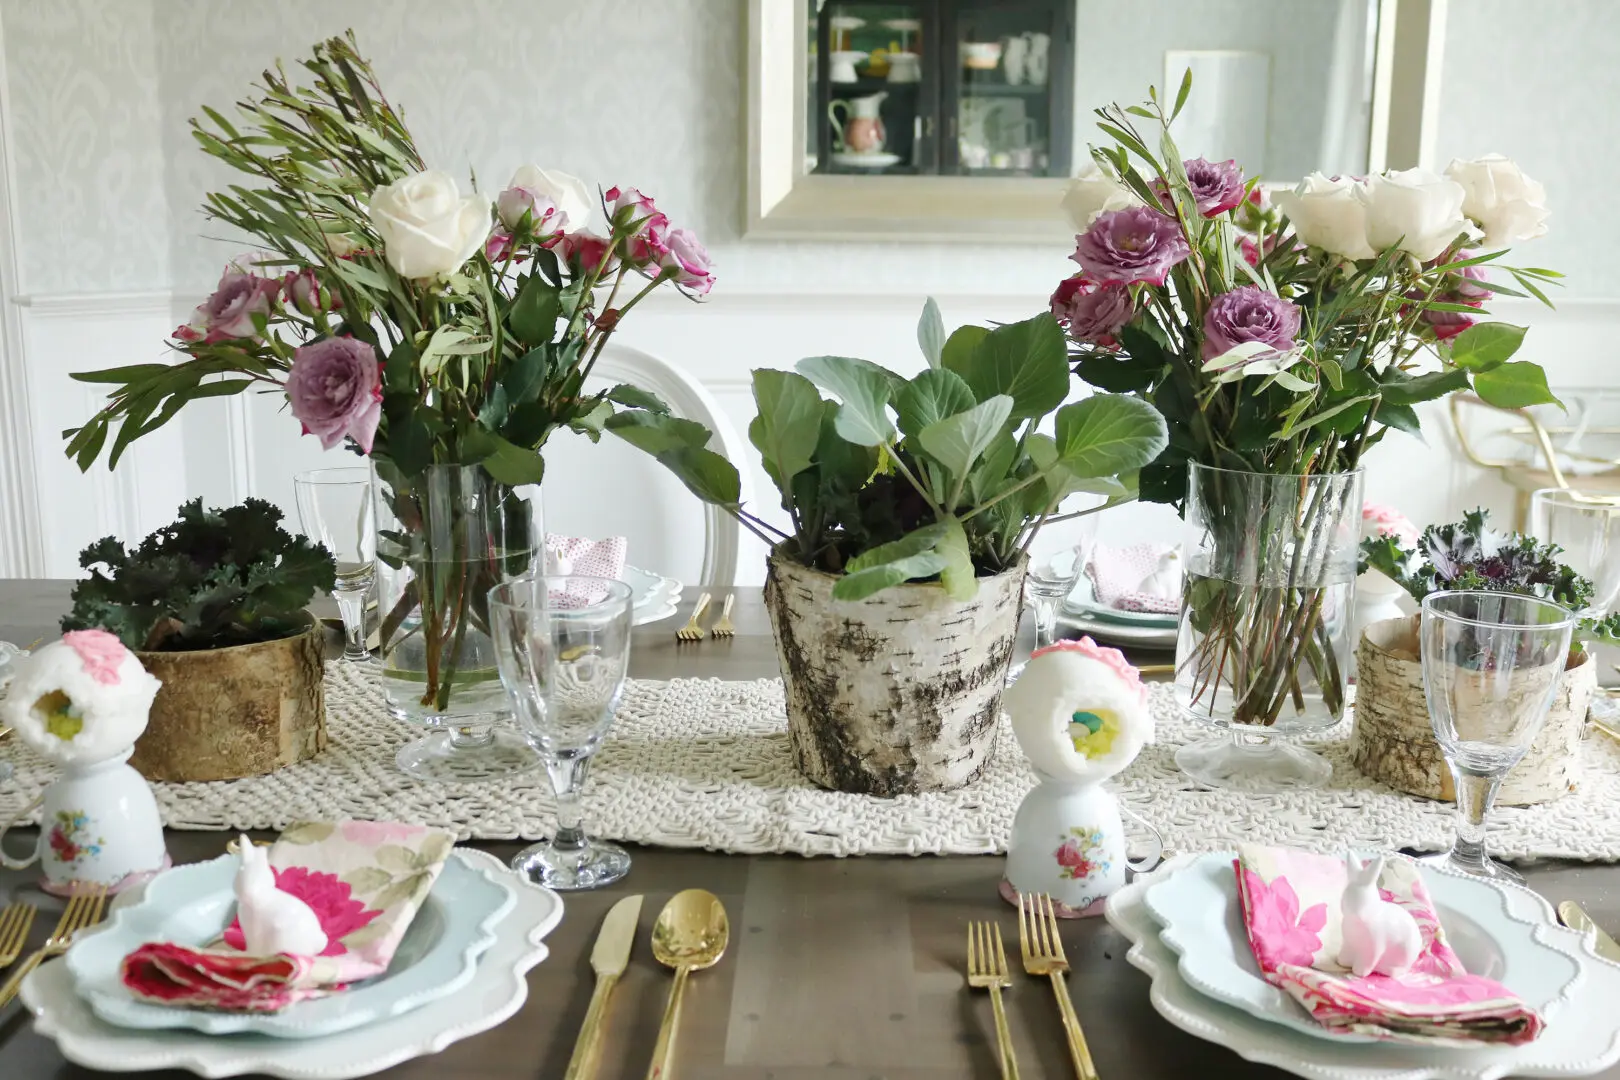 Garden-Inspired Easter Table with Sugar Easter Eggs || Darling Darleen